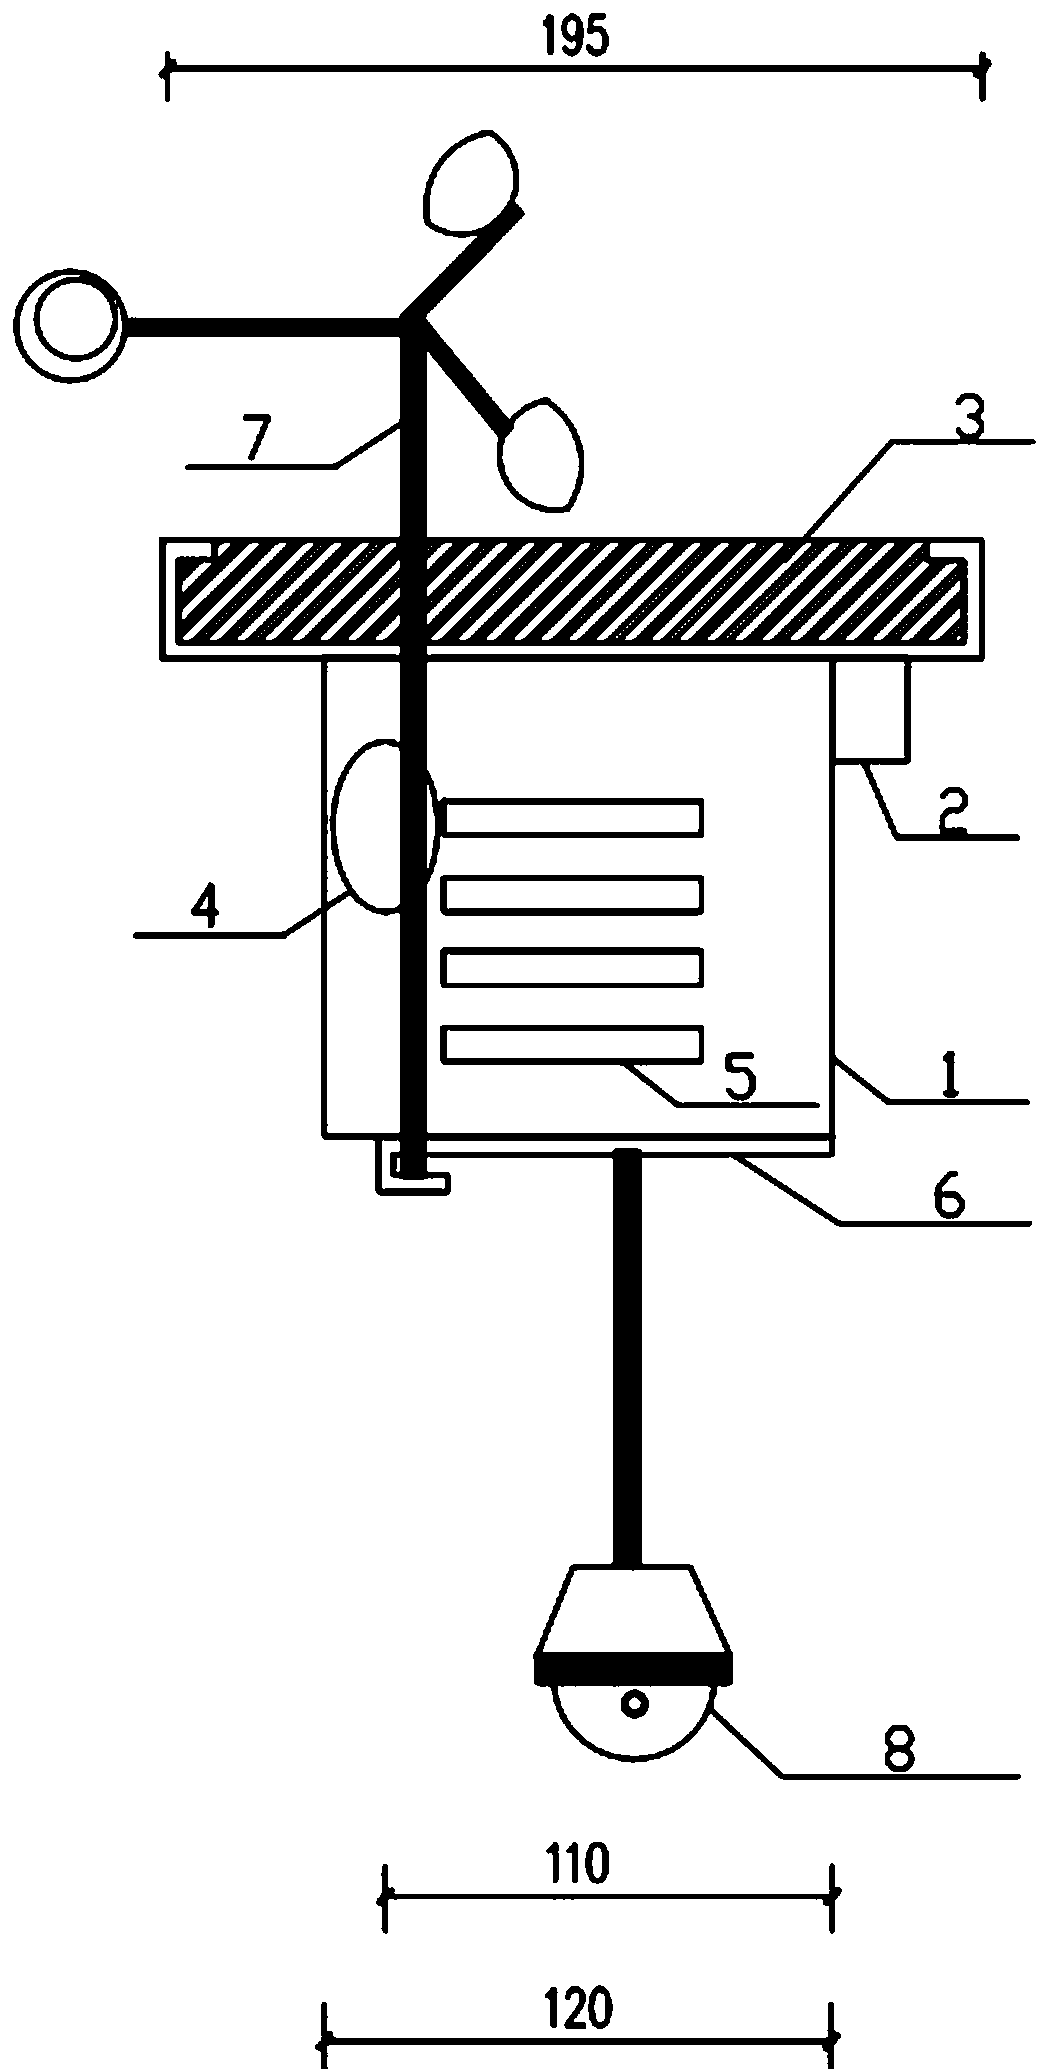 Intermittently-operable intelligence bird dispeller for high-voltage towers